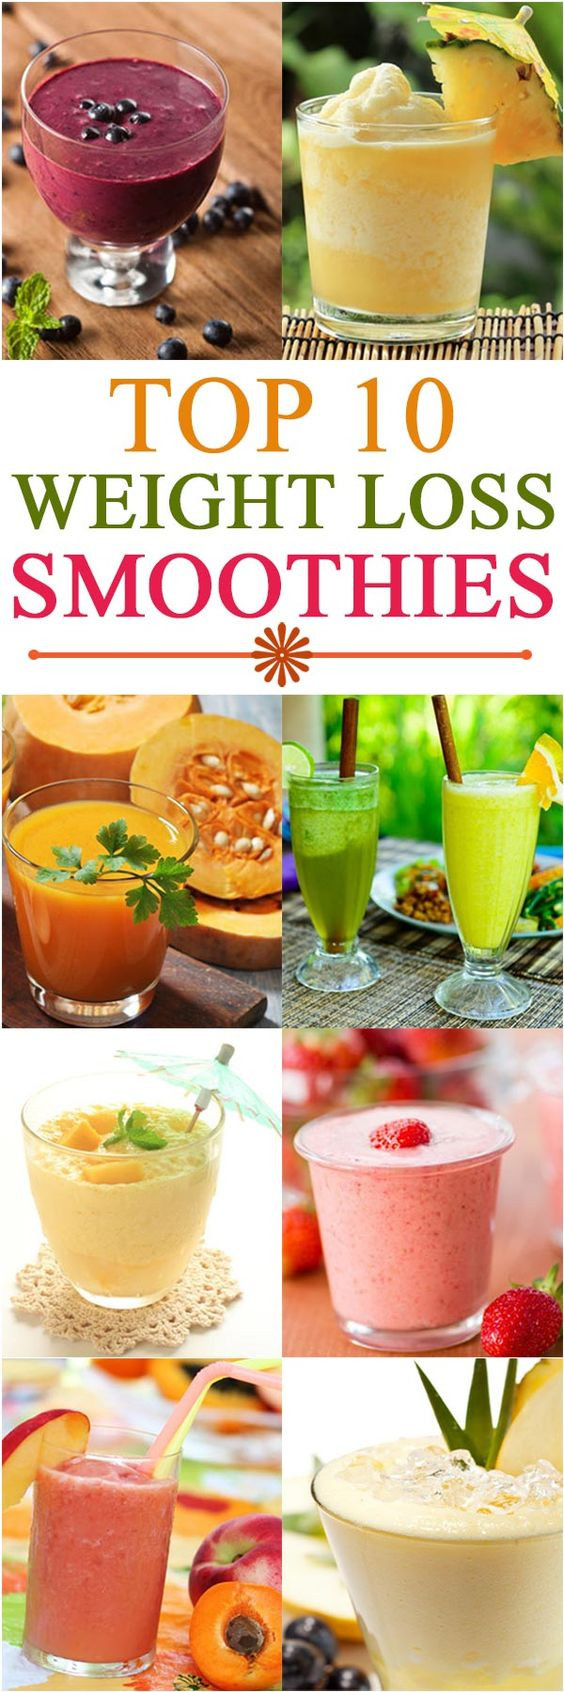 Vegetable Smoothie Recipes For Weight Loss
 Your Weight Loss Prescription Make e For Breakfast